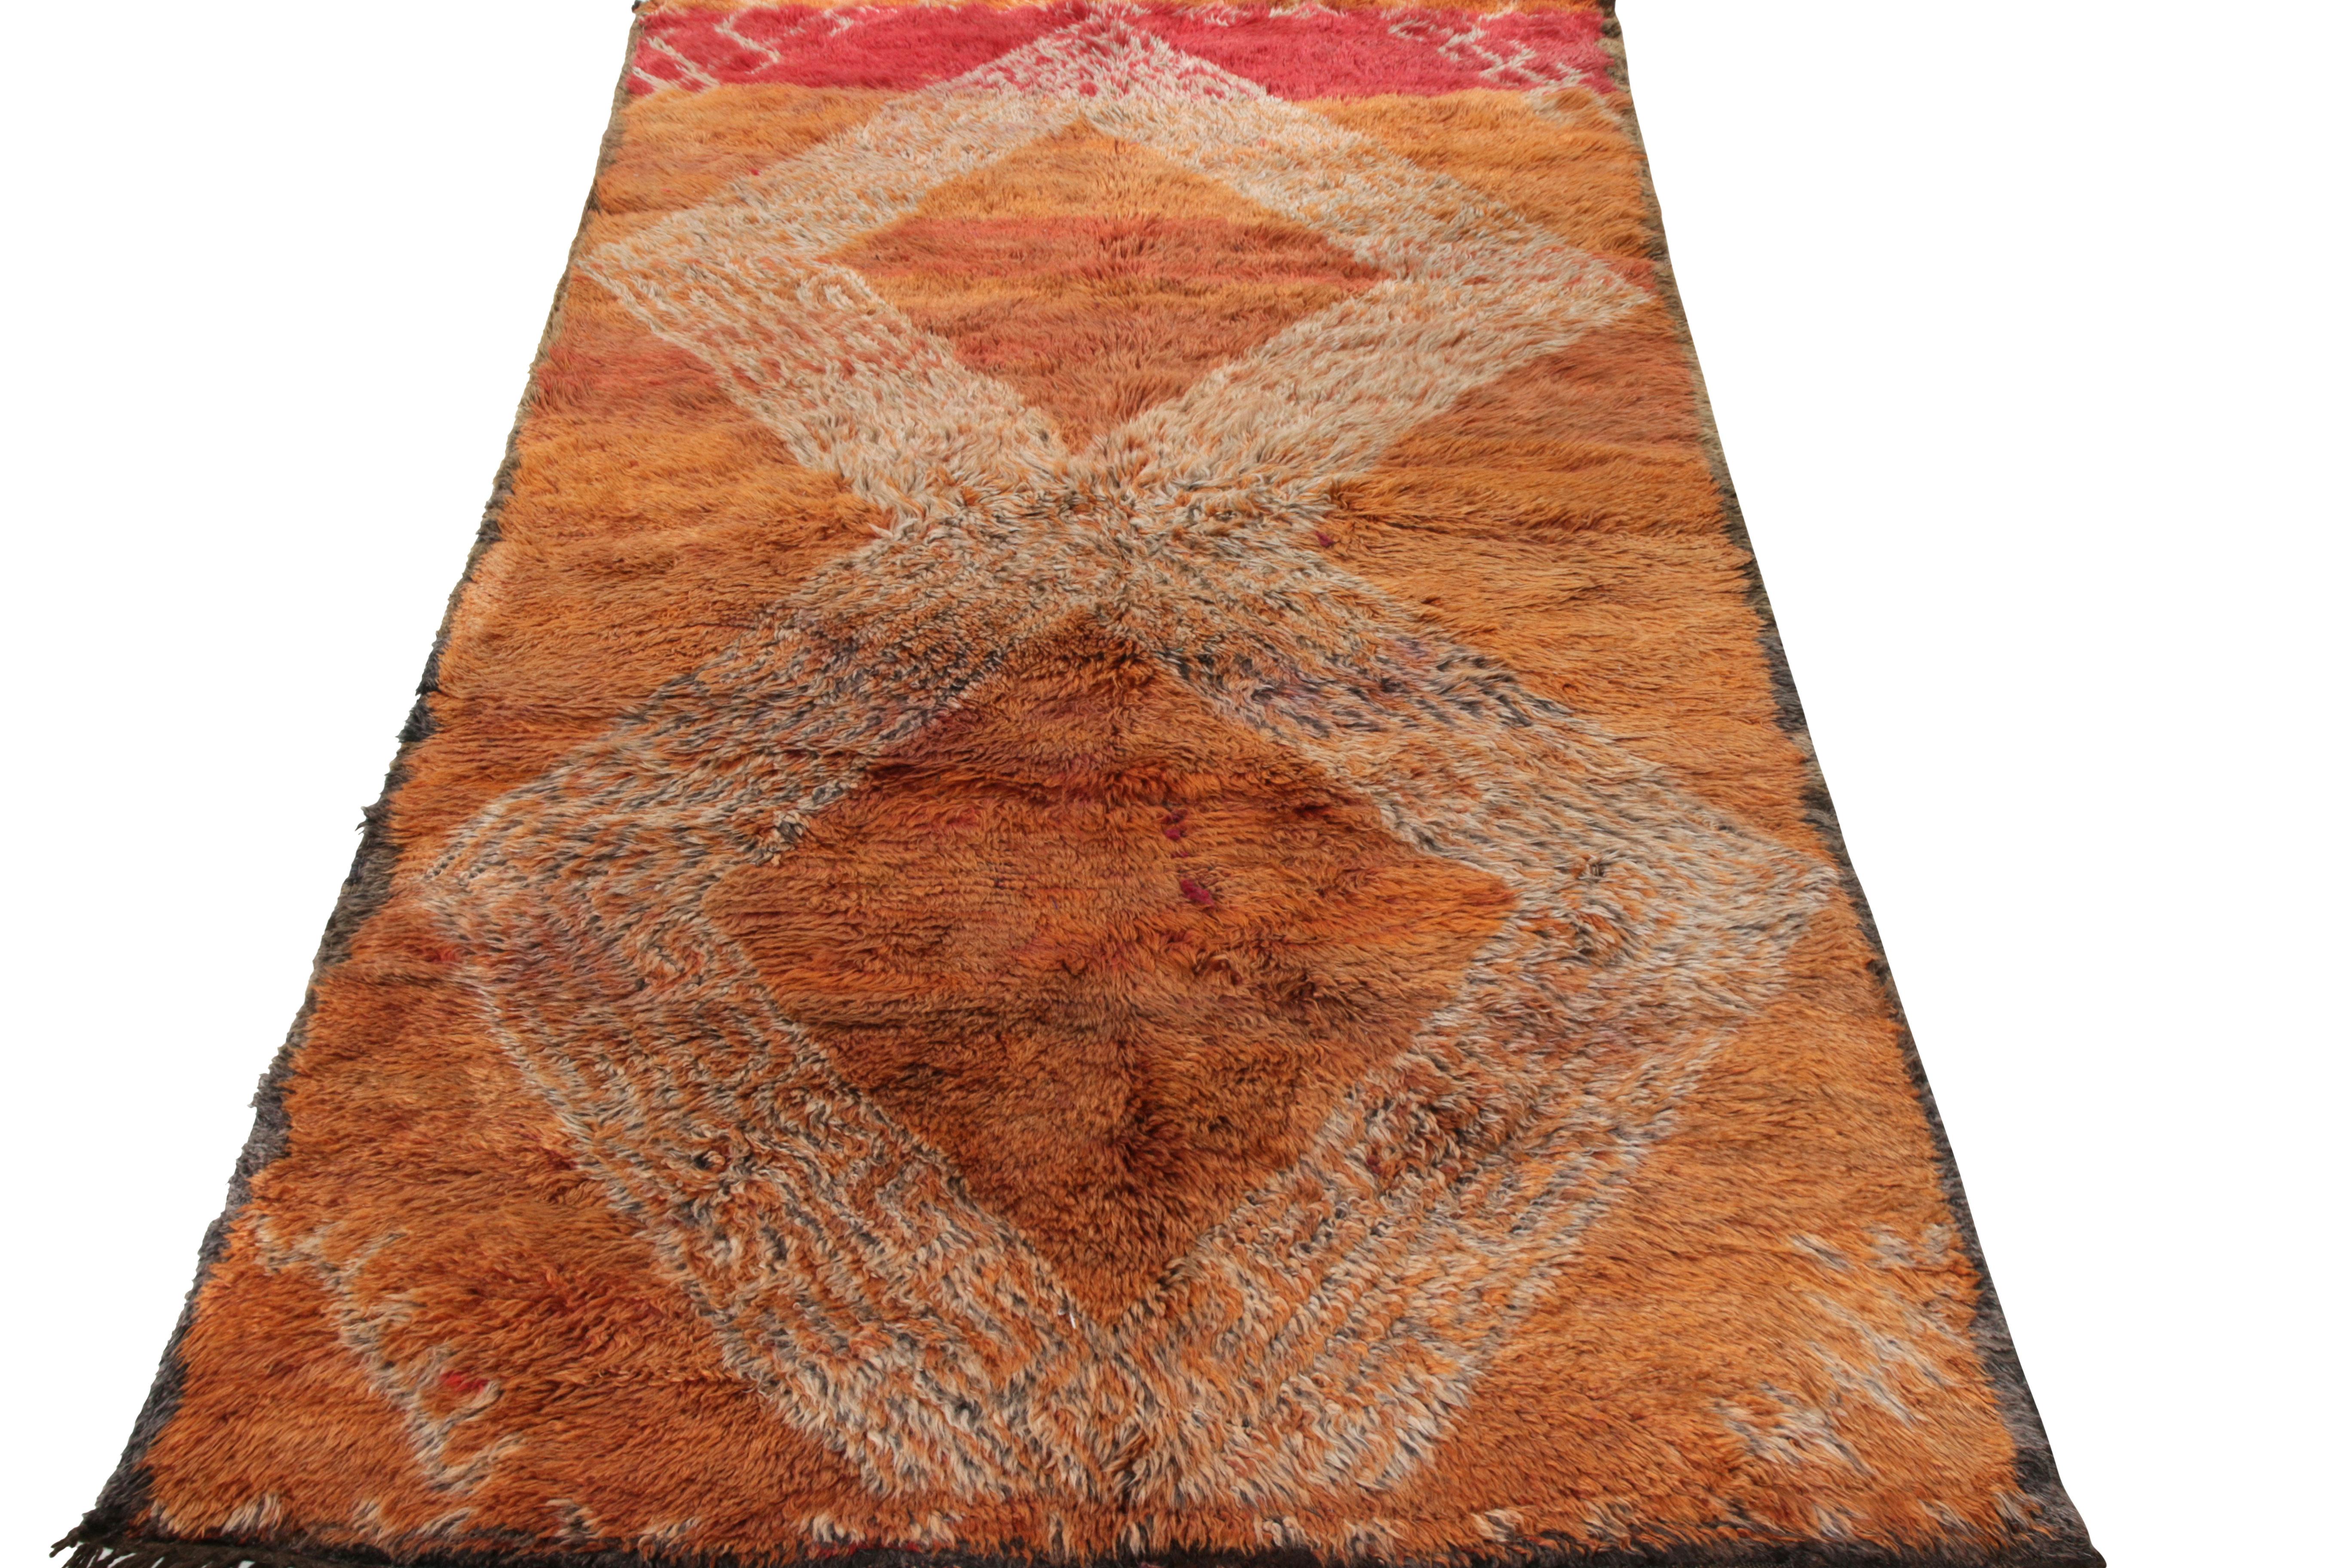 Hand knotted in wool, a 5x10 Berber runner joining Rug & Kilim’s diverse Moroccan rug collection. Originating from Morocco circa 1950-1960, this tribal style rug in a shag/high pile textura features a well defined geometric pattern with open field